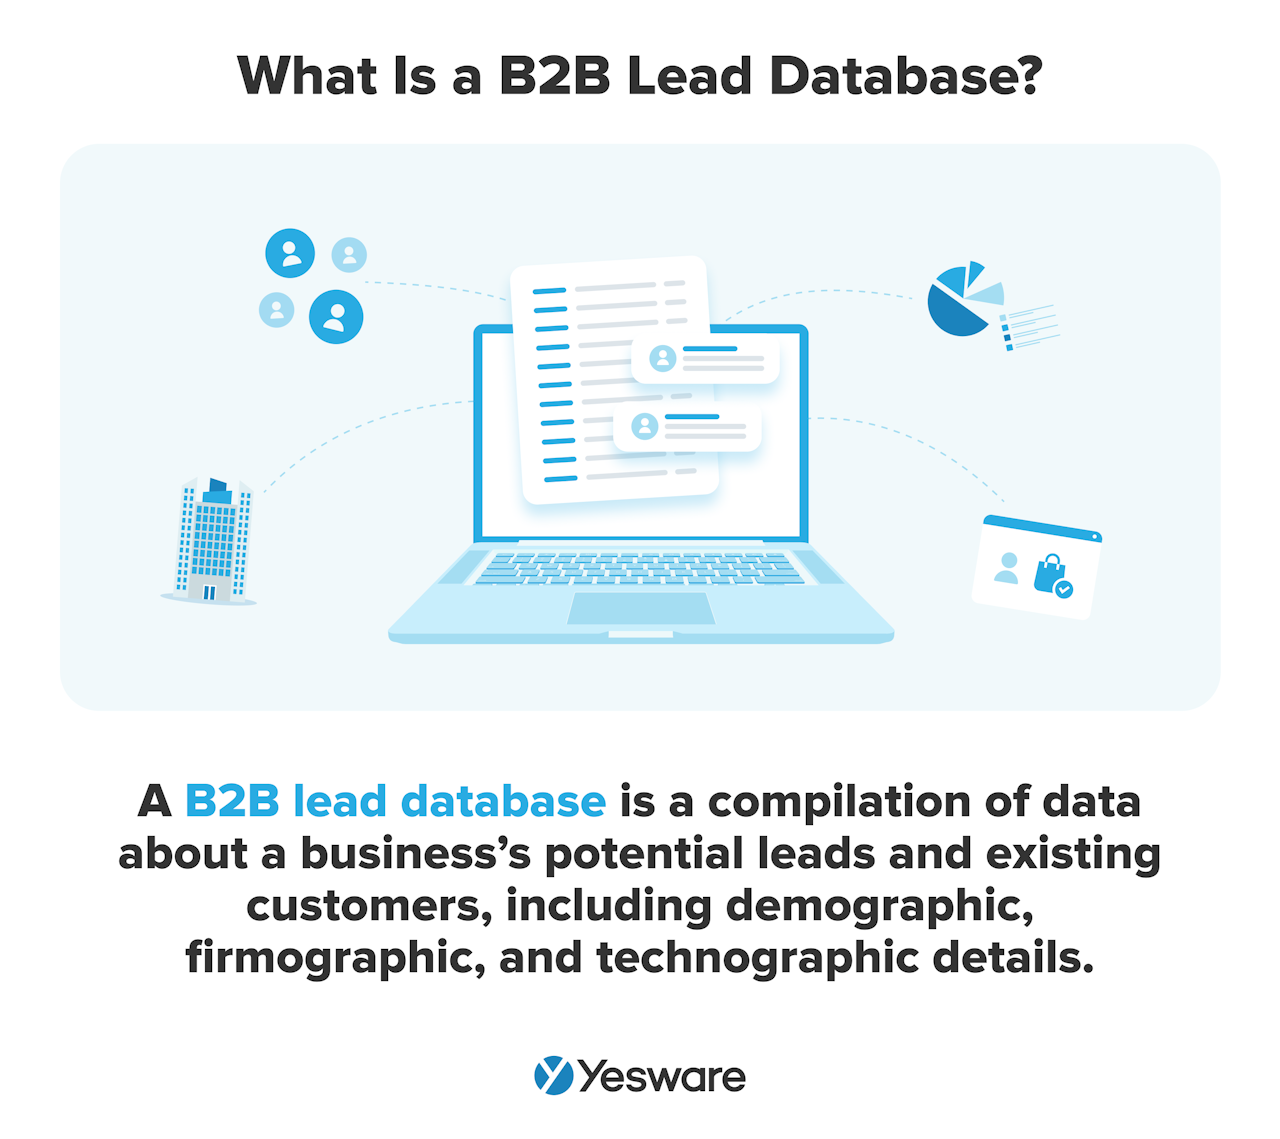 What is a B2B lead database?